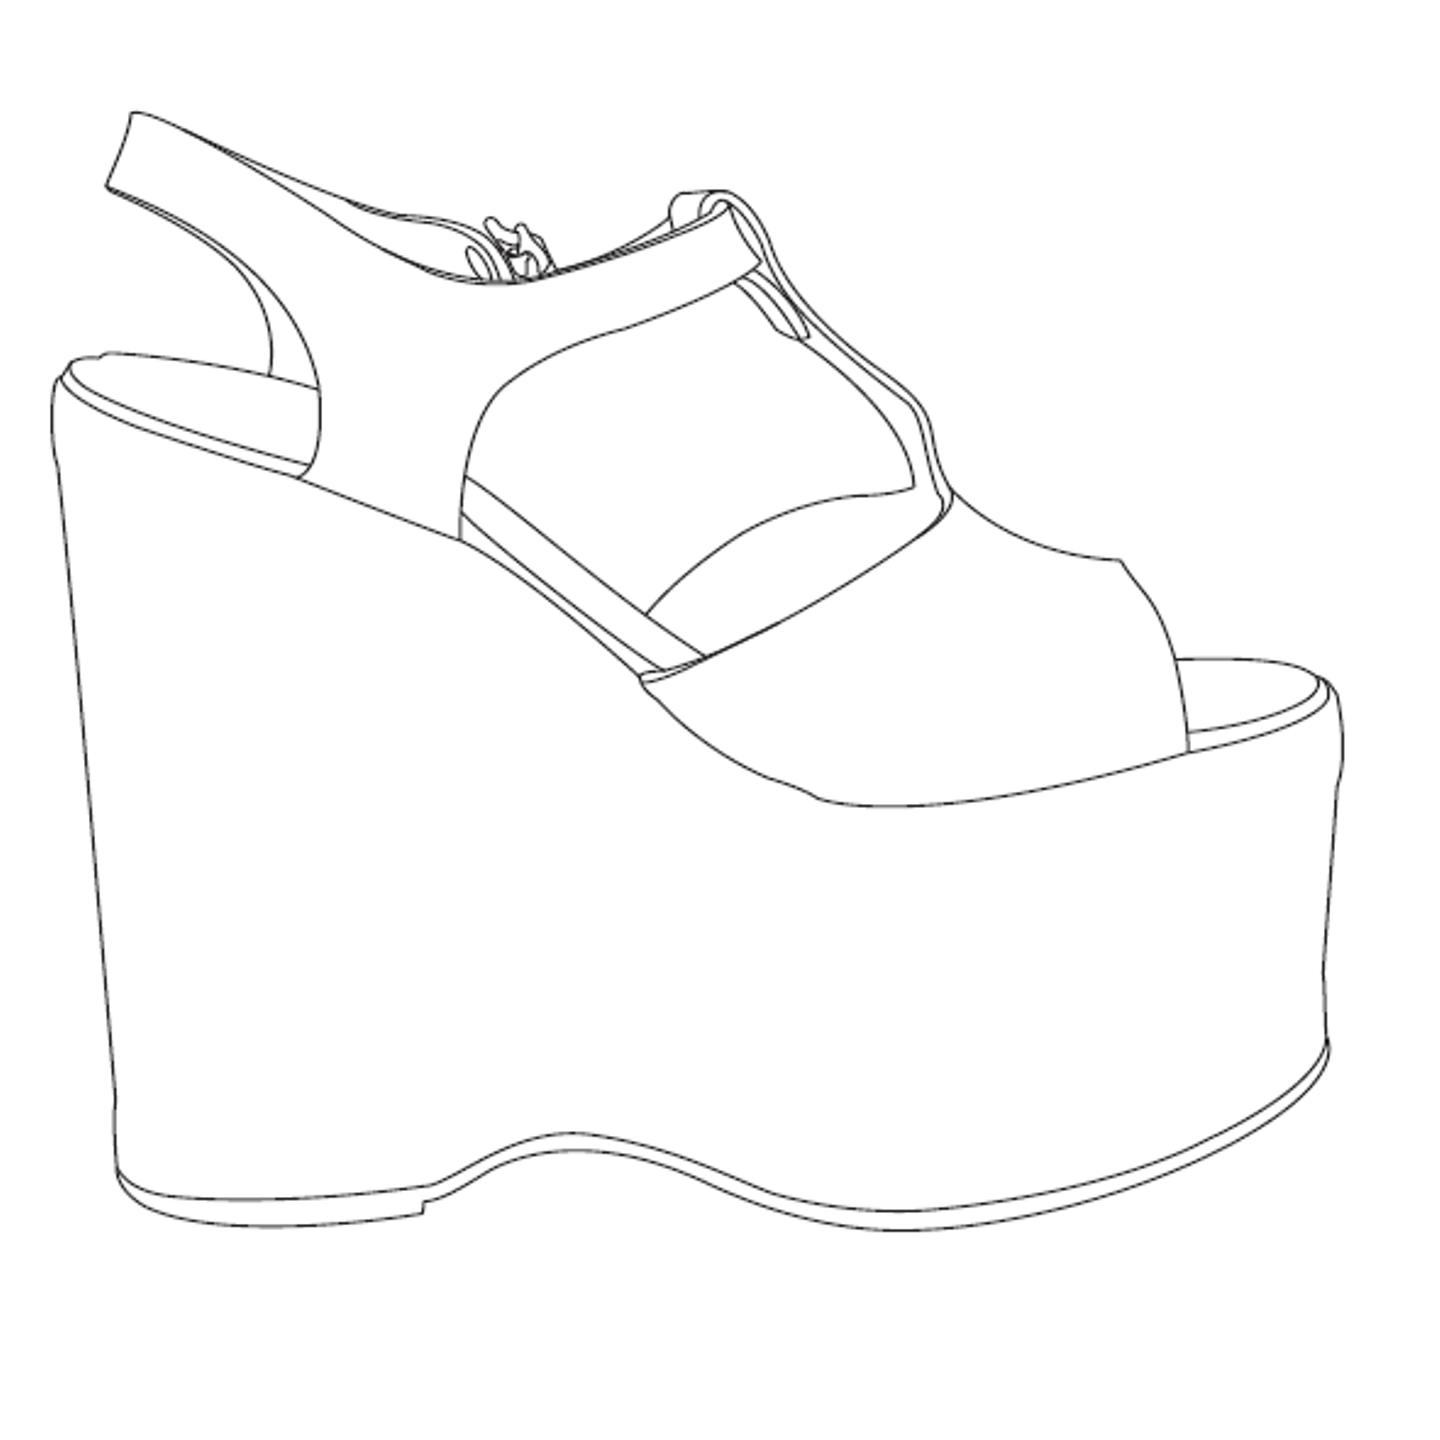 Free Shoe Outline Template, Download Free Clip Art, Free Clip Art on Clipart Library